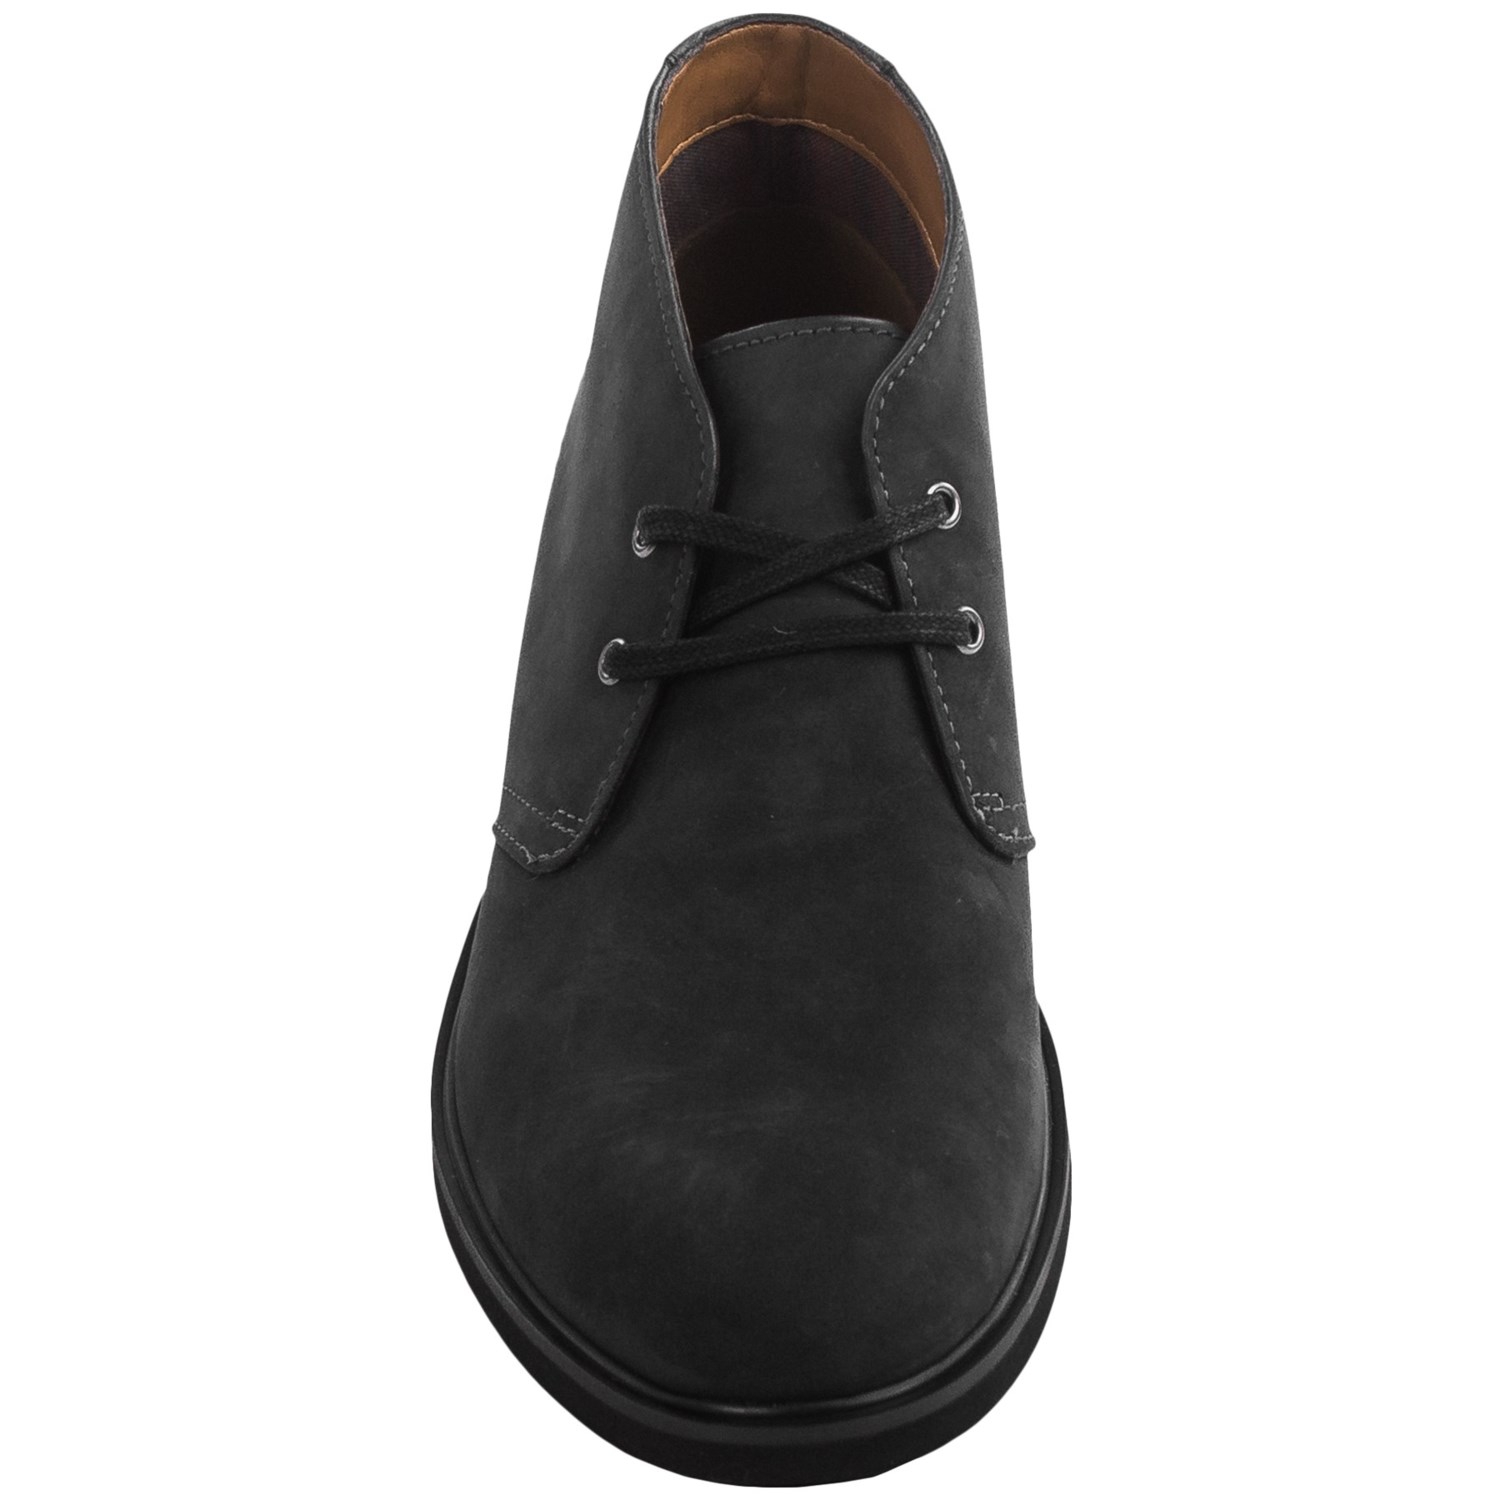 Clarks Riston Style Chukka Boots (For Men) - Save 47%